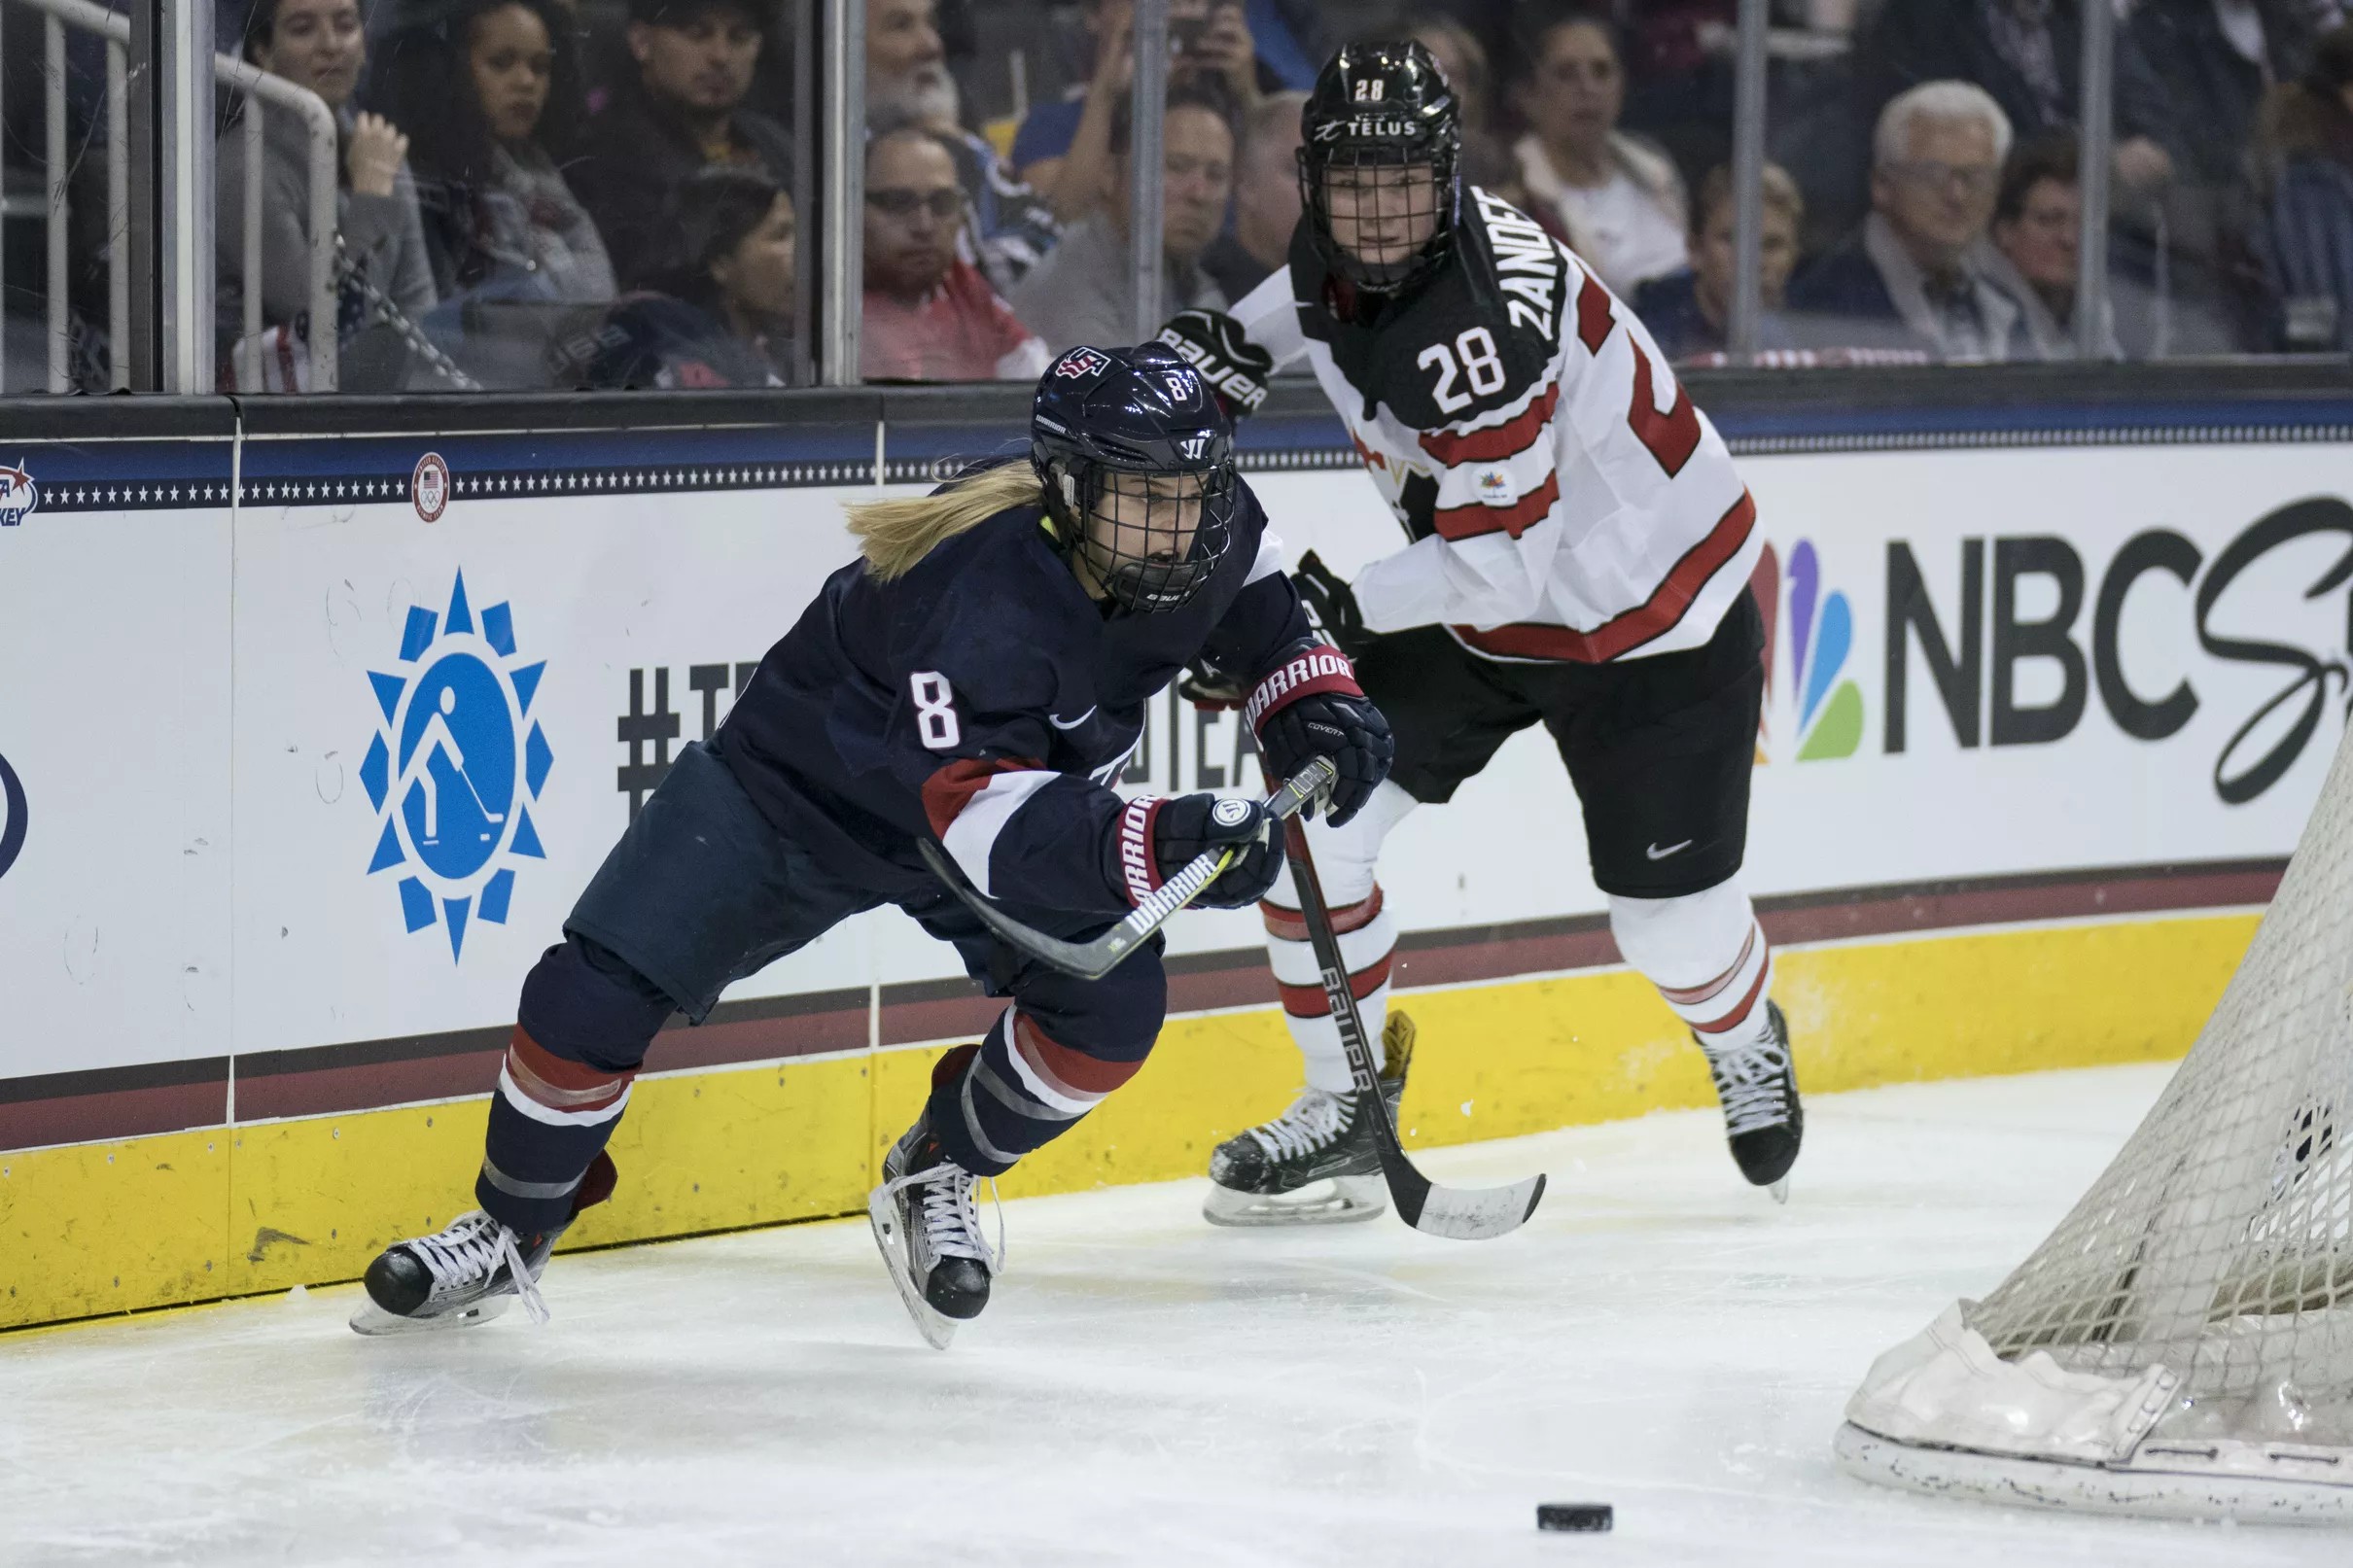 Last one before it counts: Canada vs USA game six